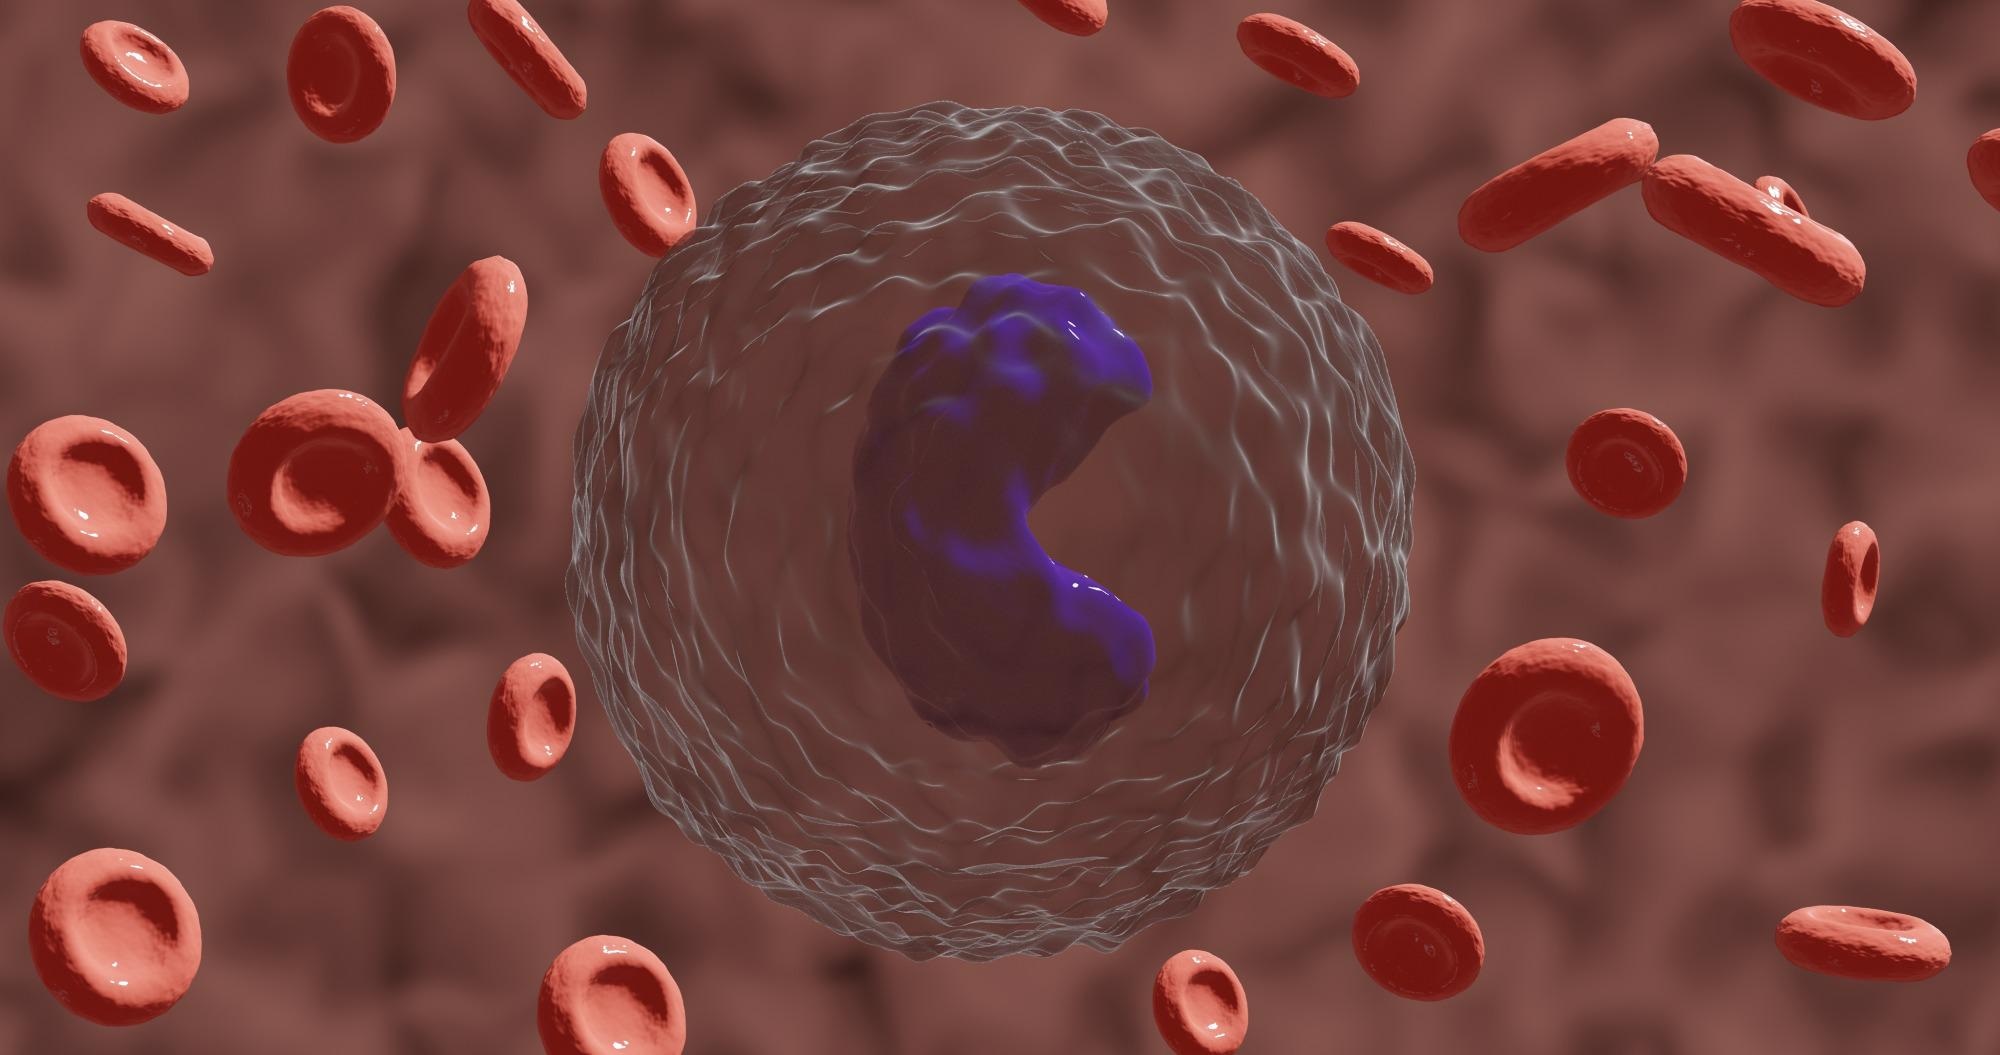 Study: Transcriptional reprogramming from innate immune functions to a pro-thrombotic signature upon SARS-CoV-2 sensing by monocytes in COVID-19. Image Credit: MohamadOuaidat / Shutterstock